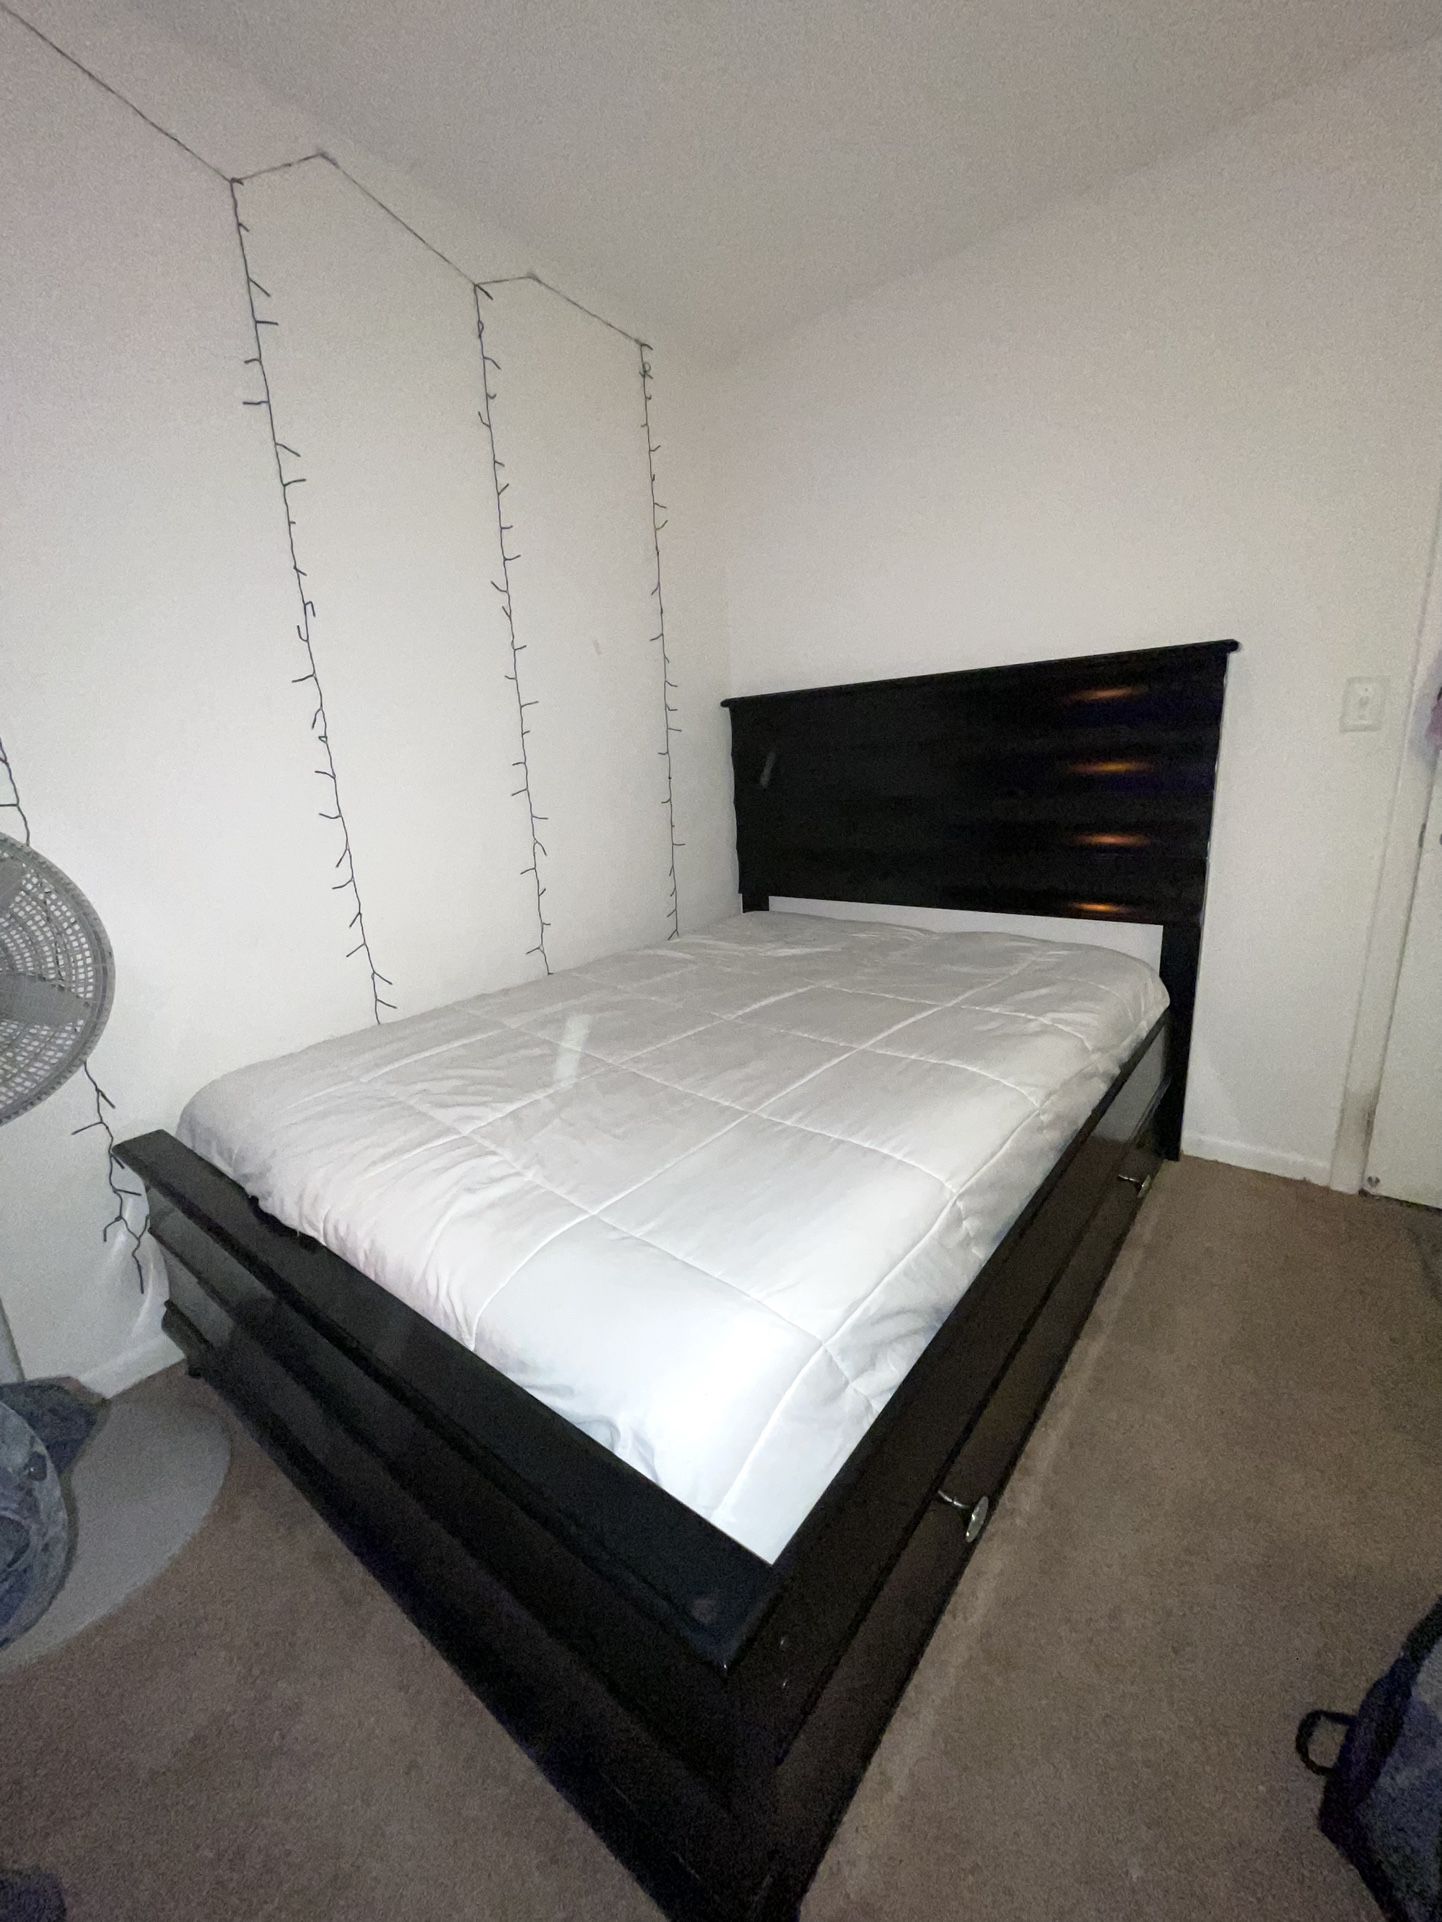 Full-sized trundle bed frame and Dresser for sale!